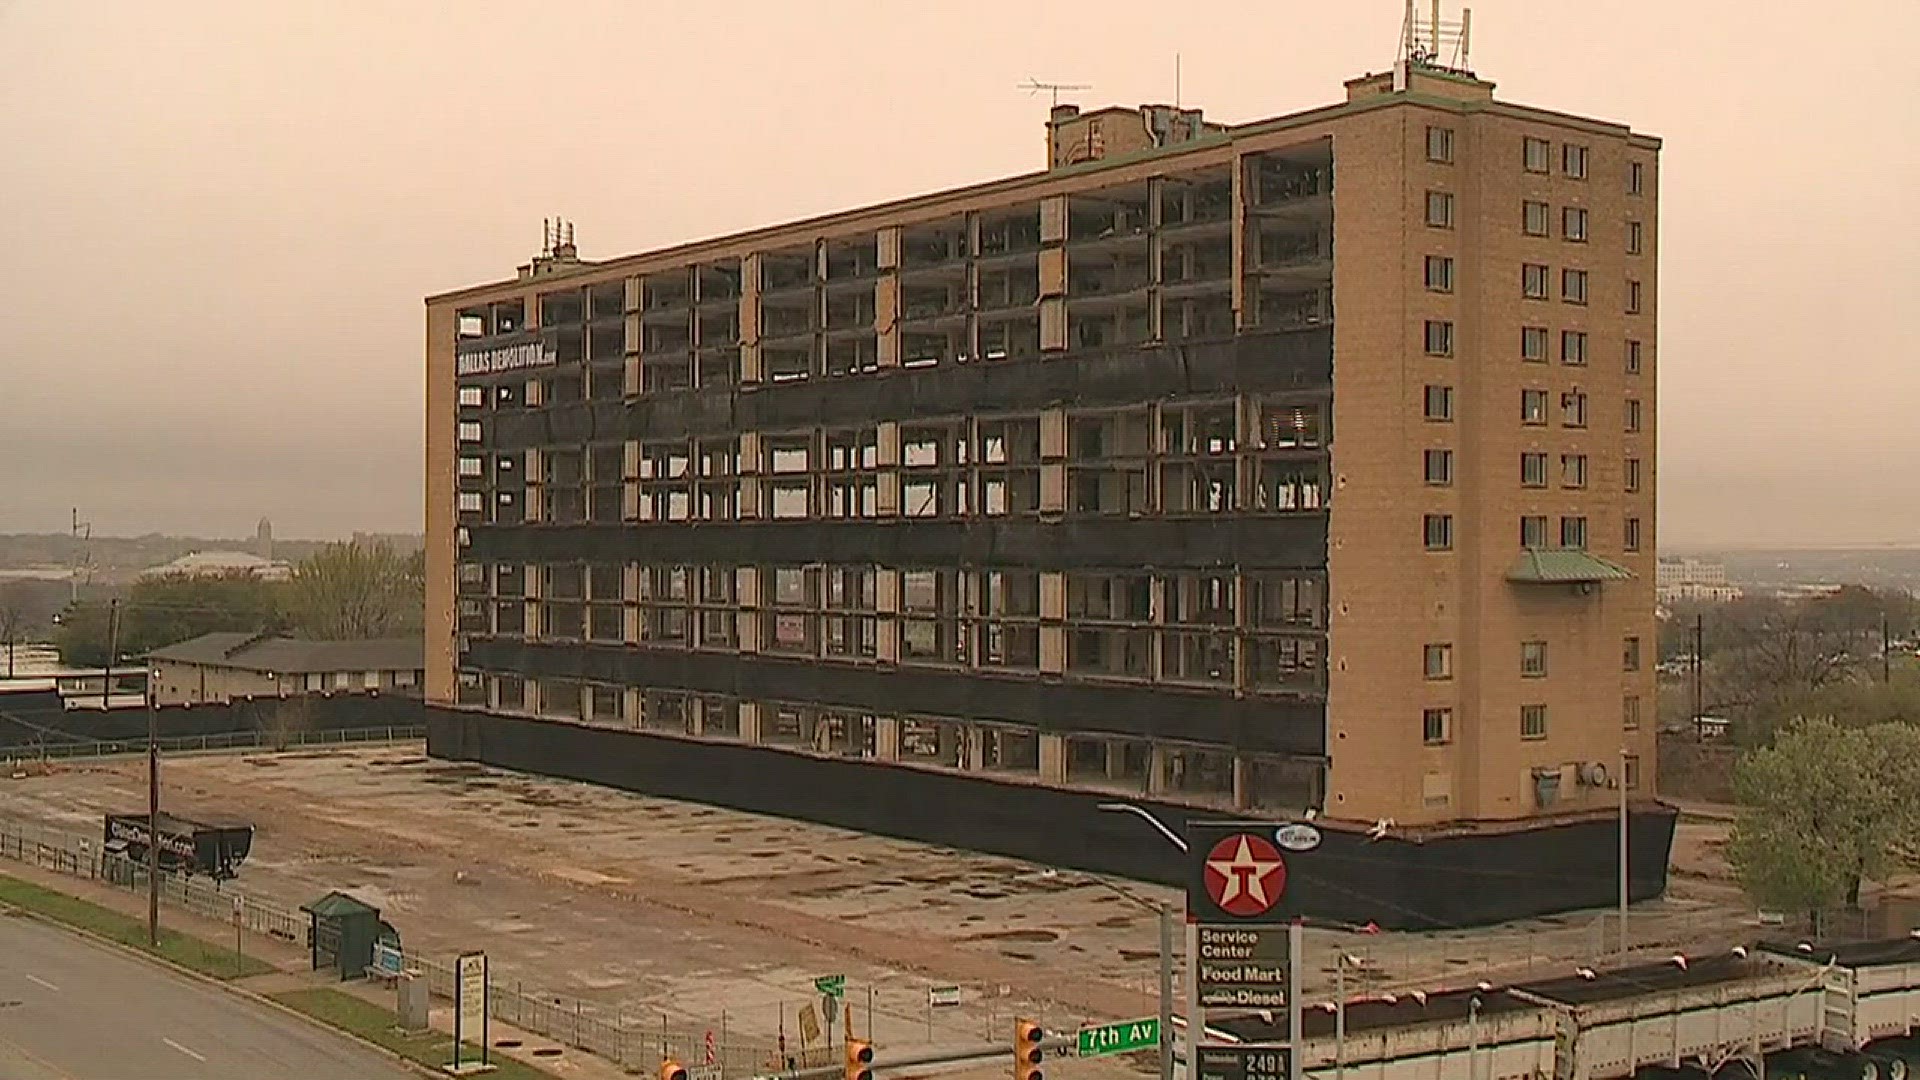 IMPLOSION: Watch Fort Worth high rise come crashing down